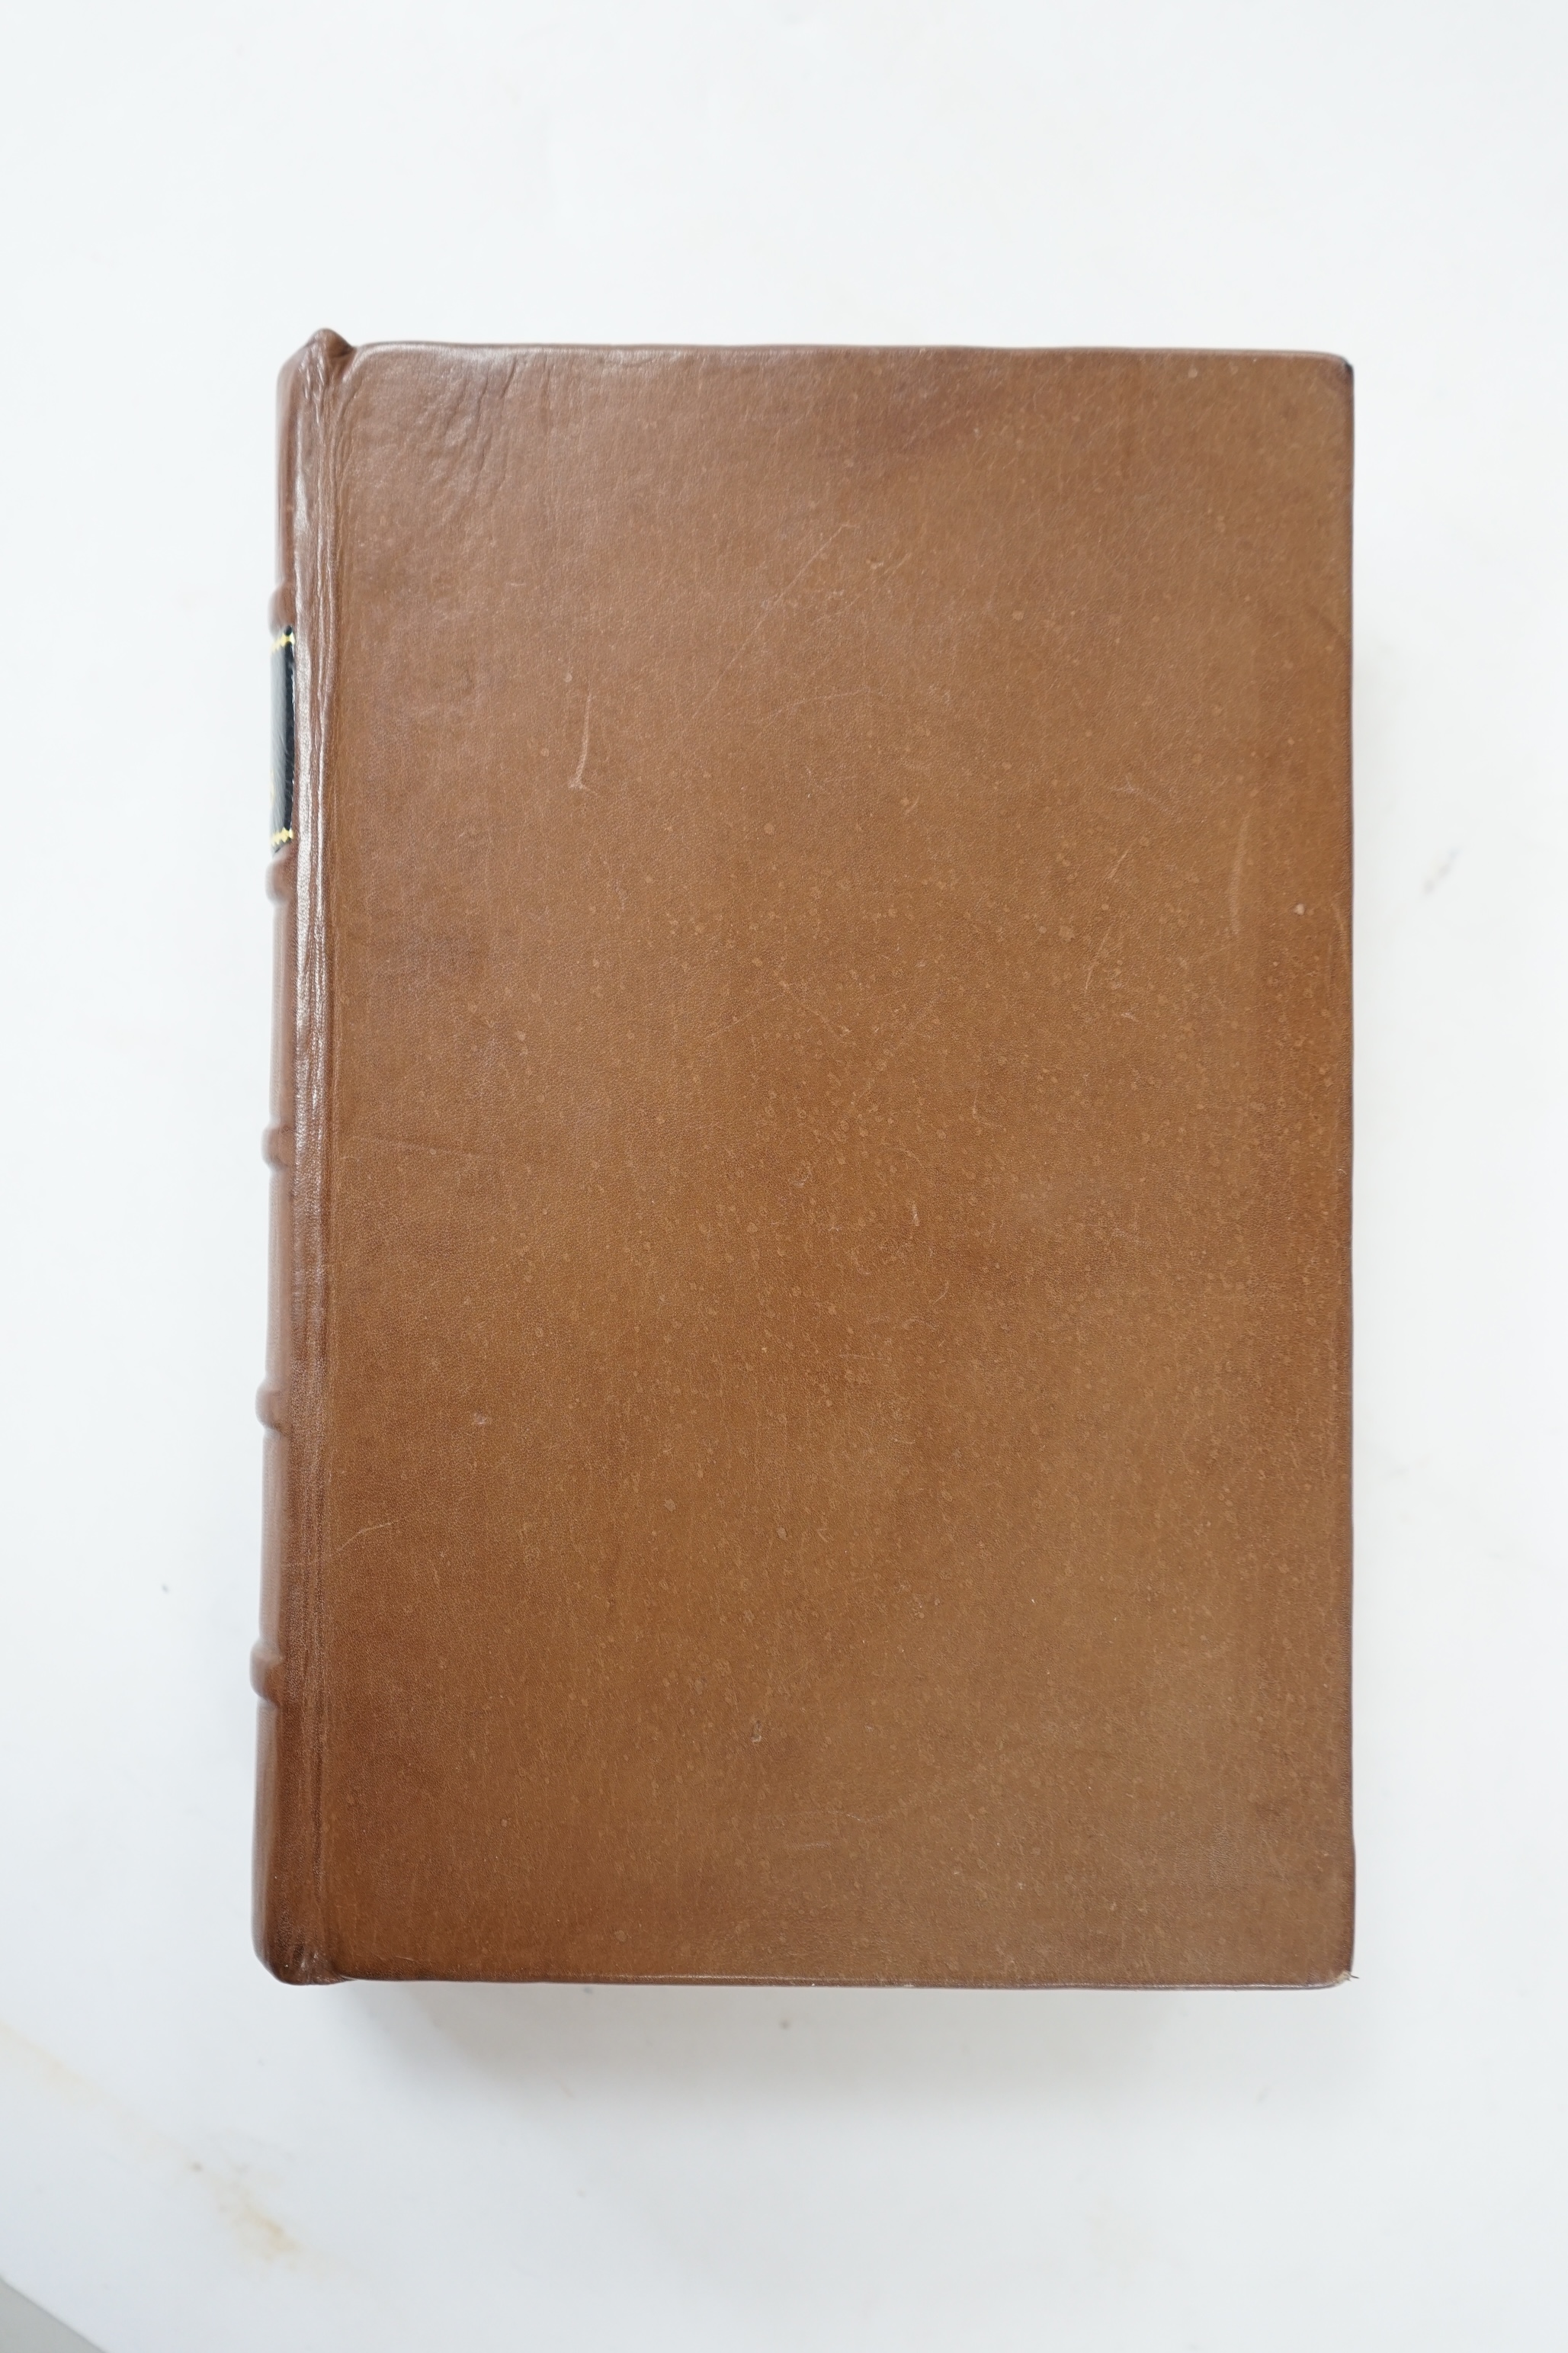 Cook, Captain James - A New, Authentic Collection of Captain Cook's Voyages Round the World, Undertaken by Order of his present Majesty, for Making New Discoveries,... Birmingham: R. Martin, 1790. 618 pp. Frontis. portra